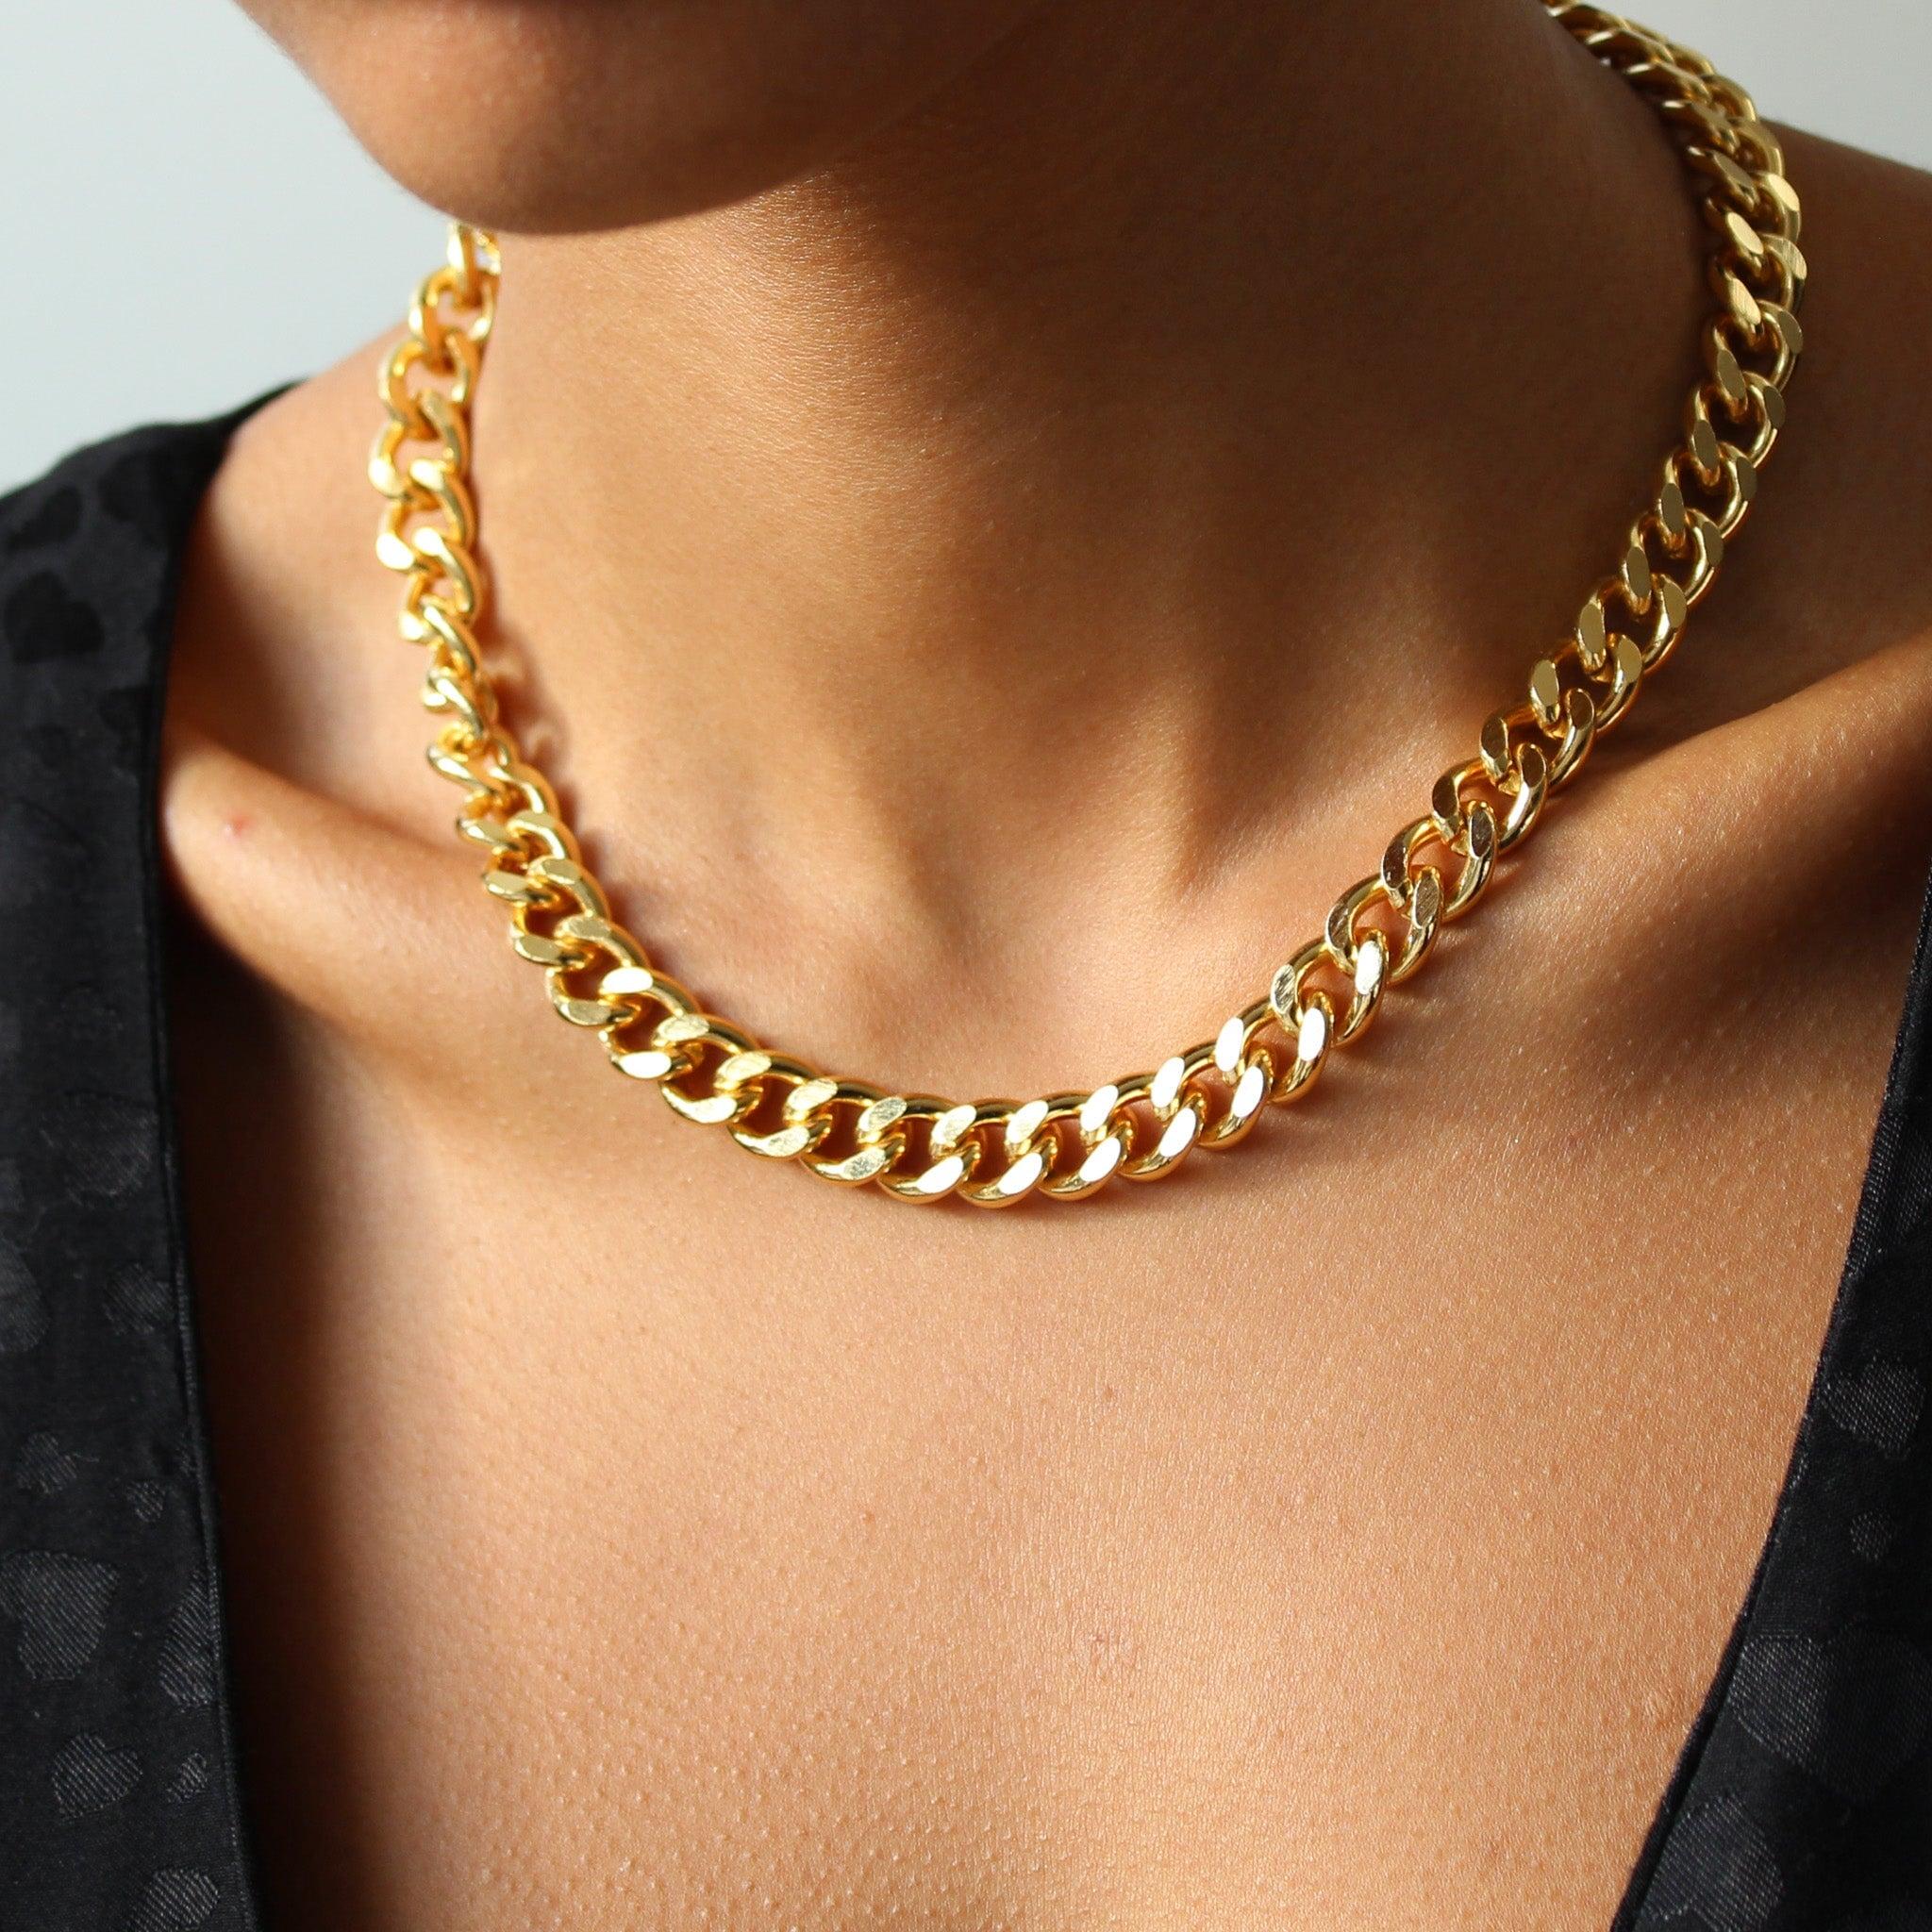 Vintage 1980s Chain Necklace - 18 Carat Gold Plated Vintage Deadstock In New Condition For Sale In London, GB